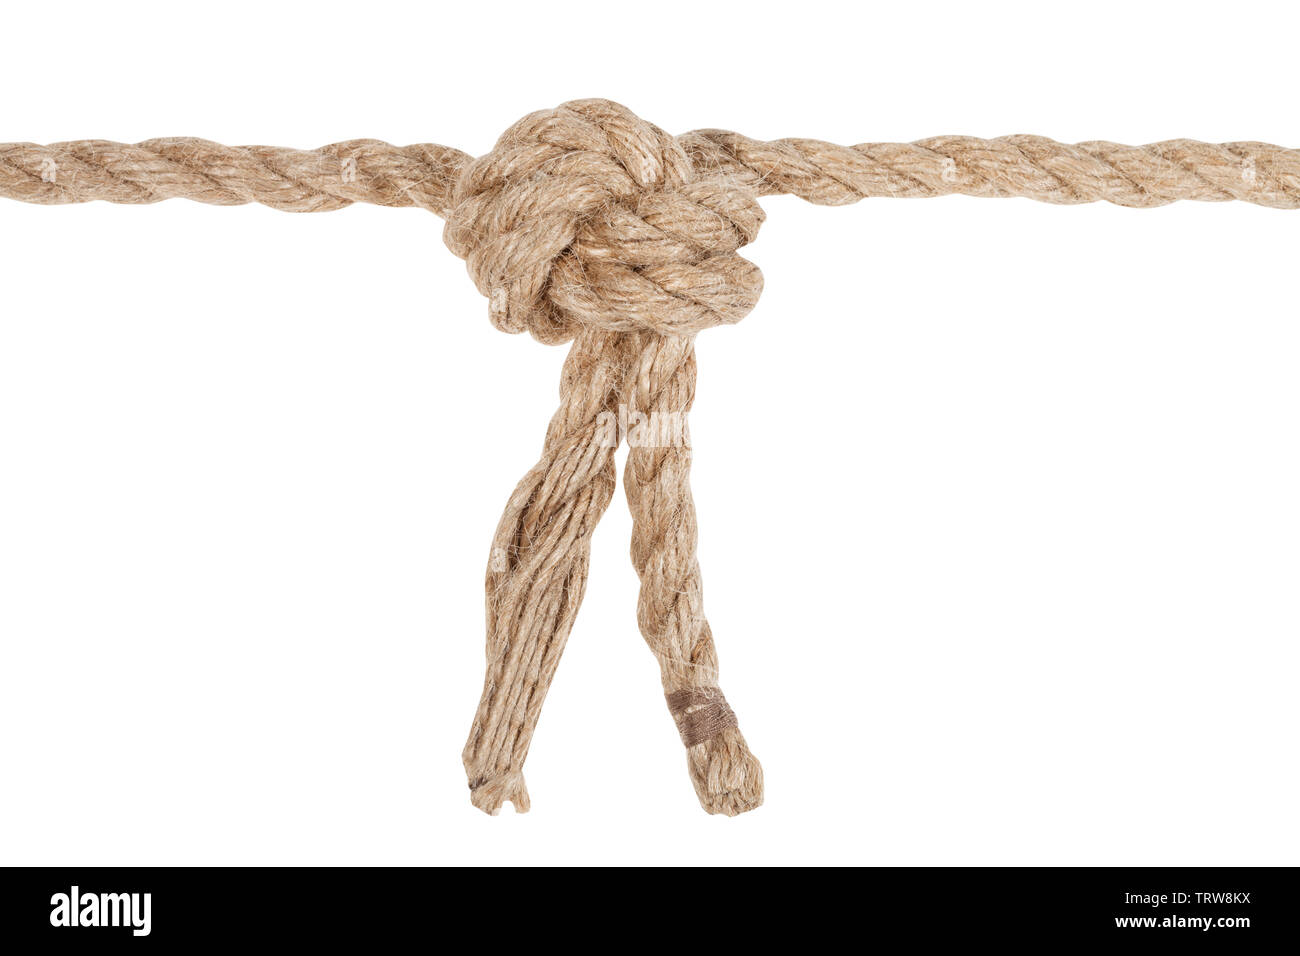 Offset overhand bend joins two ropes isolated on white background Stock Photo